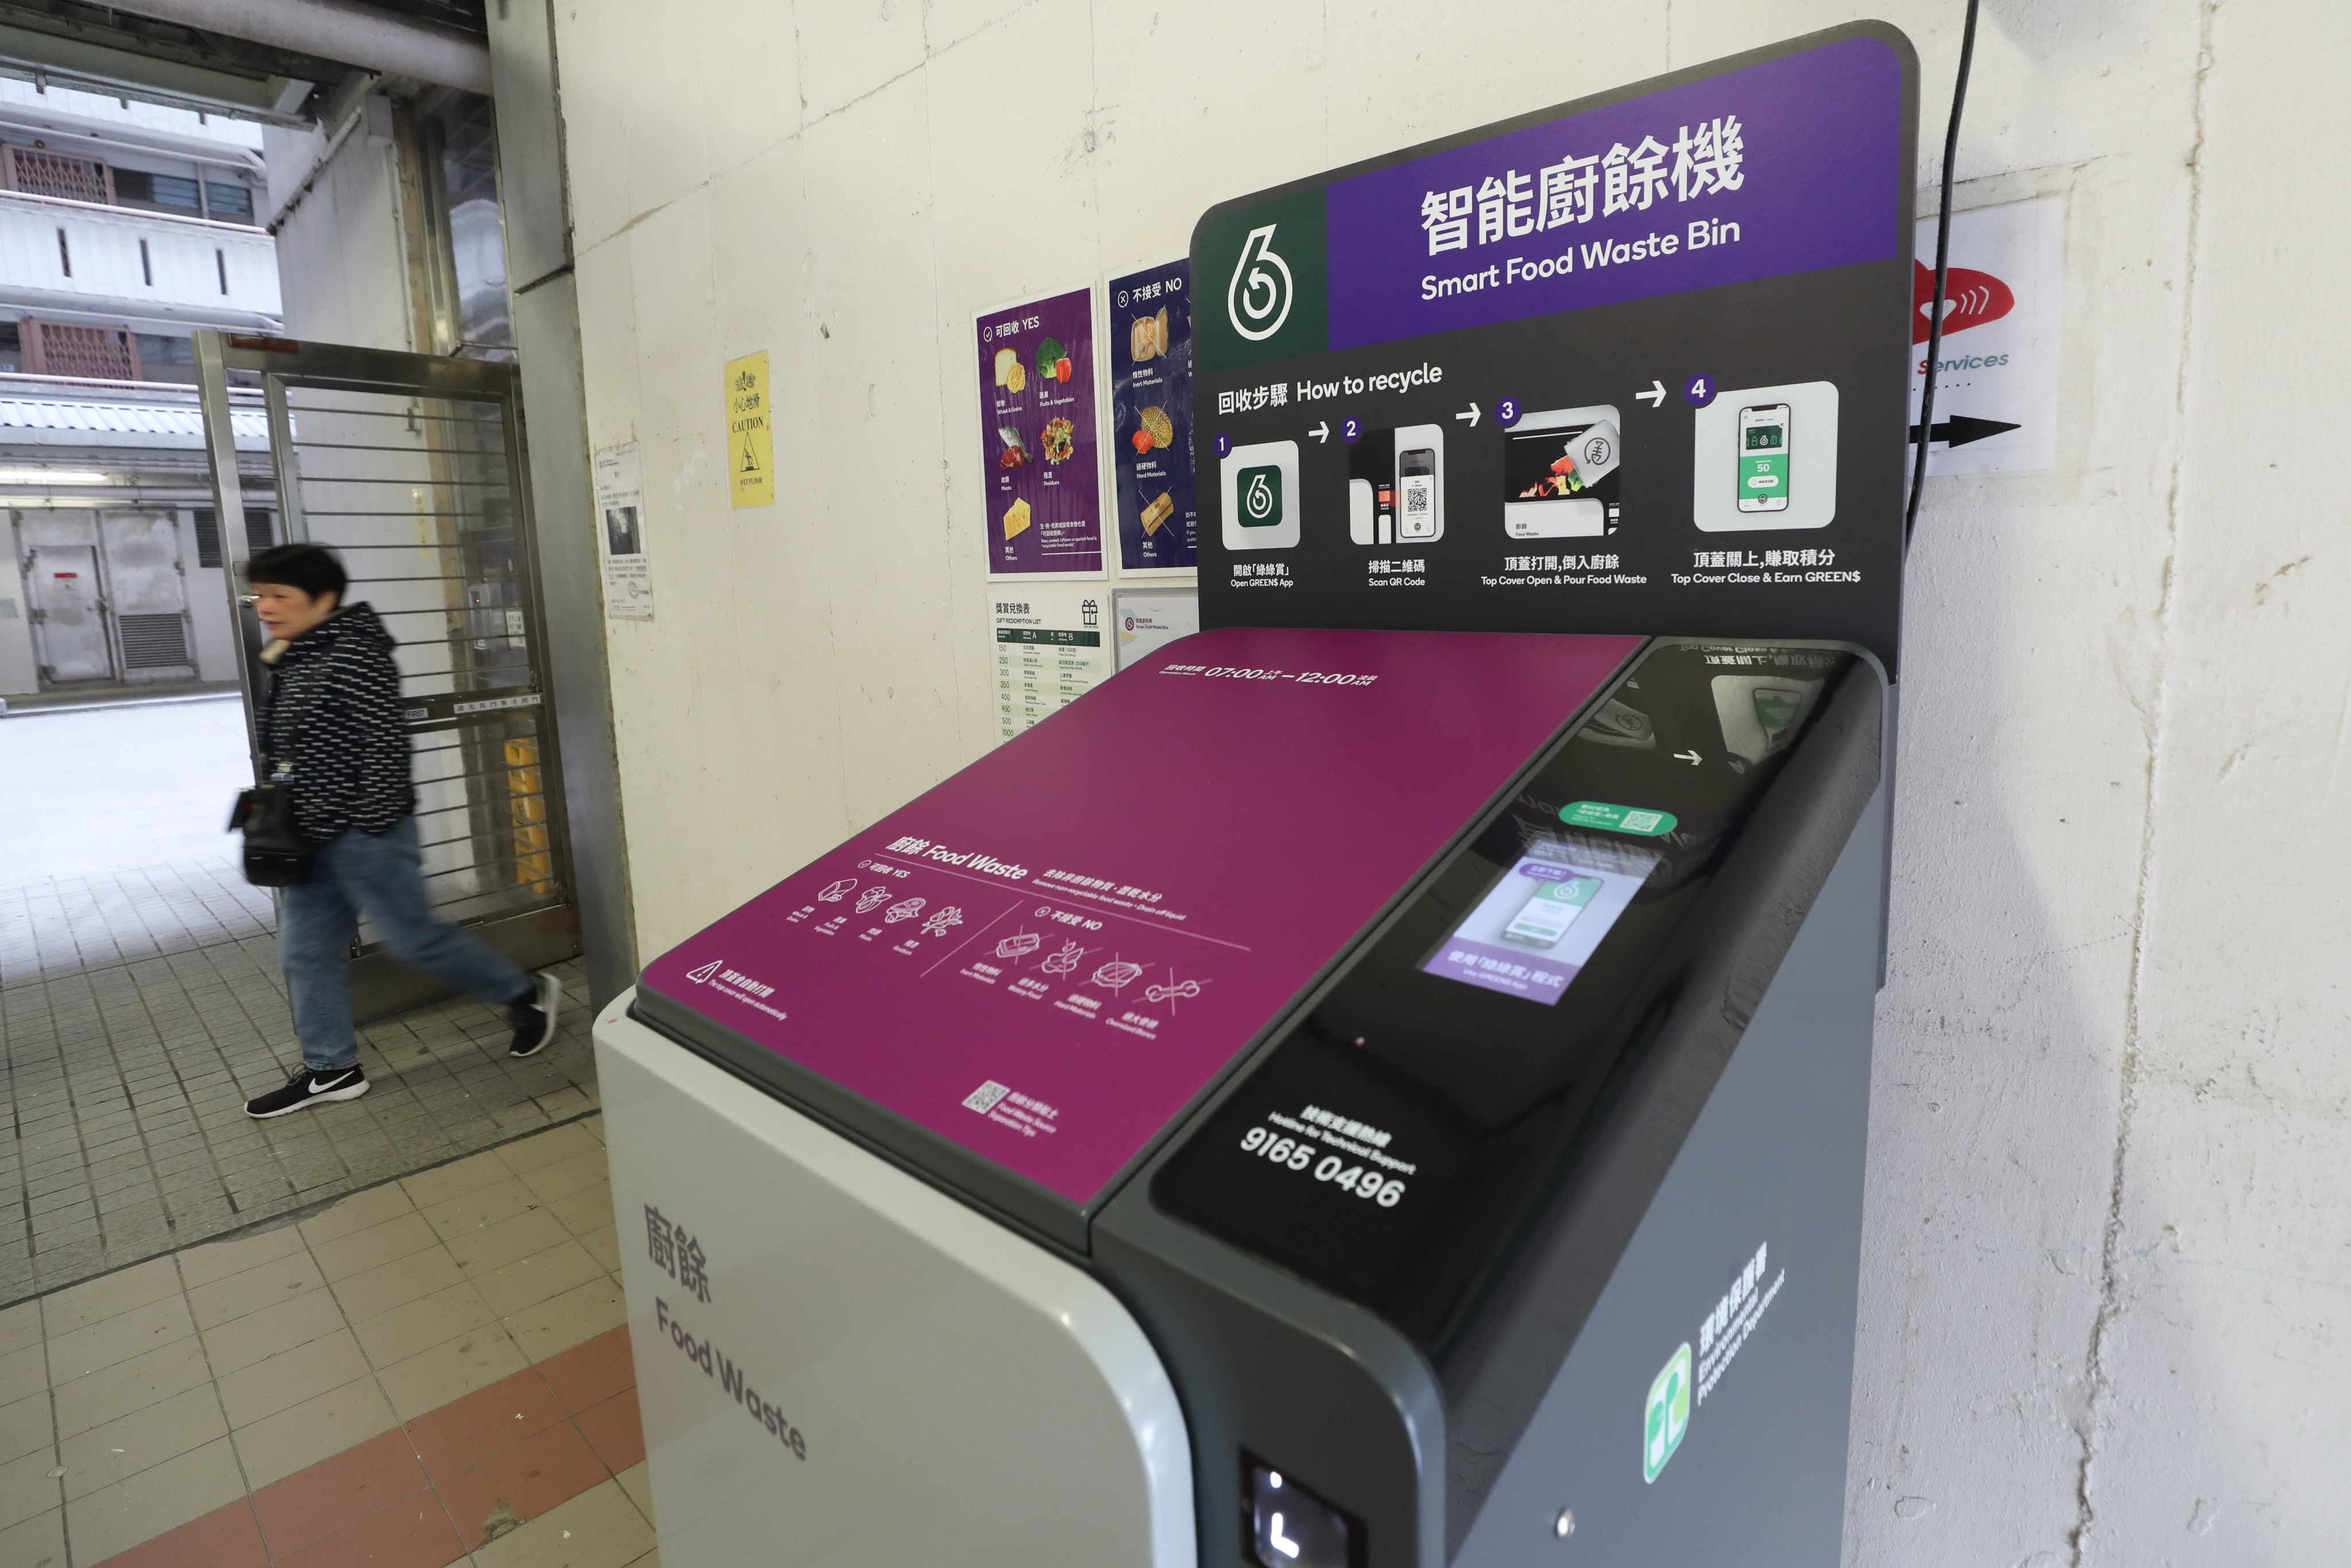 A smart food waste bin at Ping Shek Estate, Choi Hung. Additional bins would be installed at all public housing estates this year, authorities said. Photo: Sun Yeung